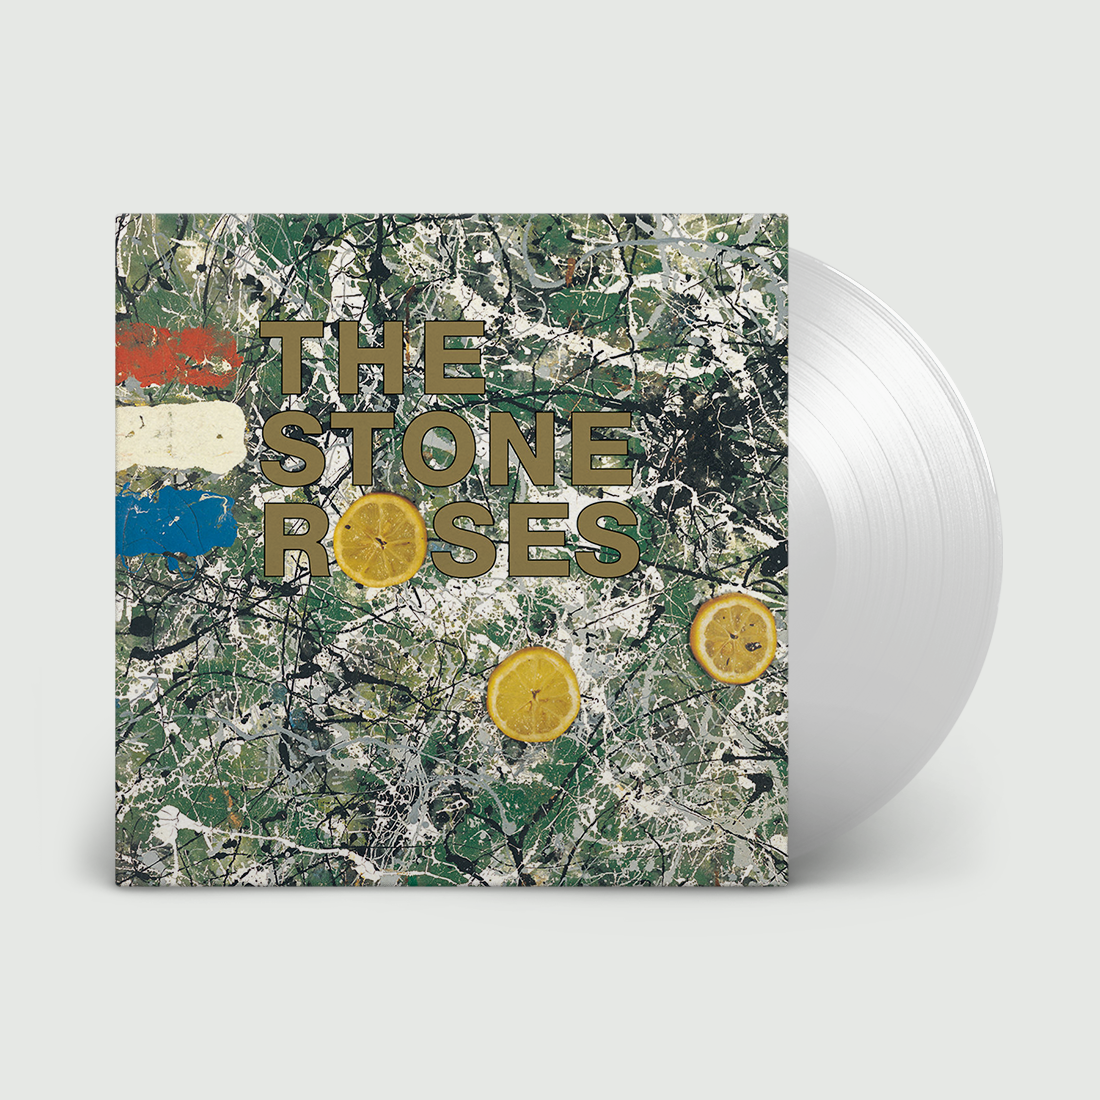 The Stone Roses - Stone Roses: Limited Edition Clear Vinyl LP